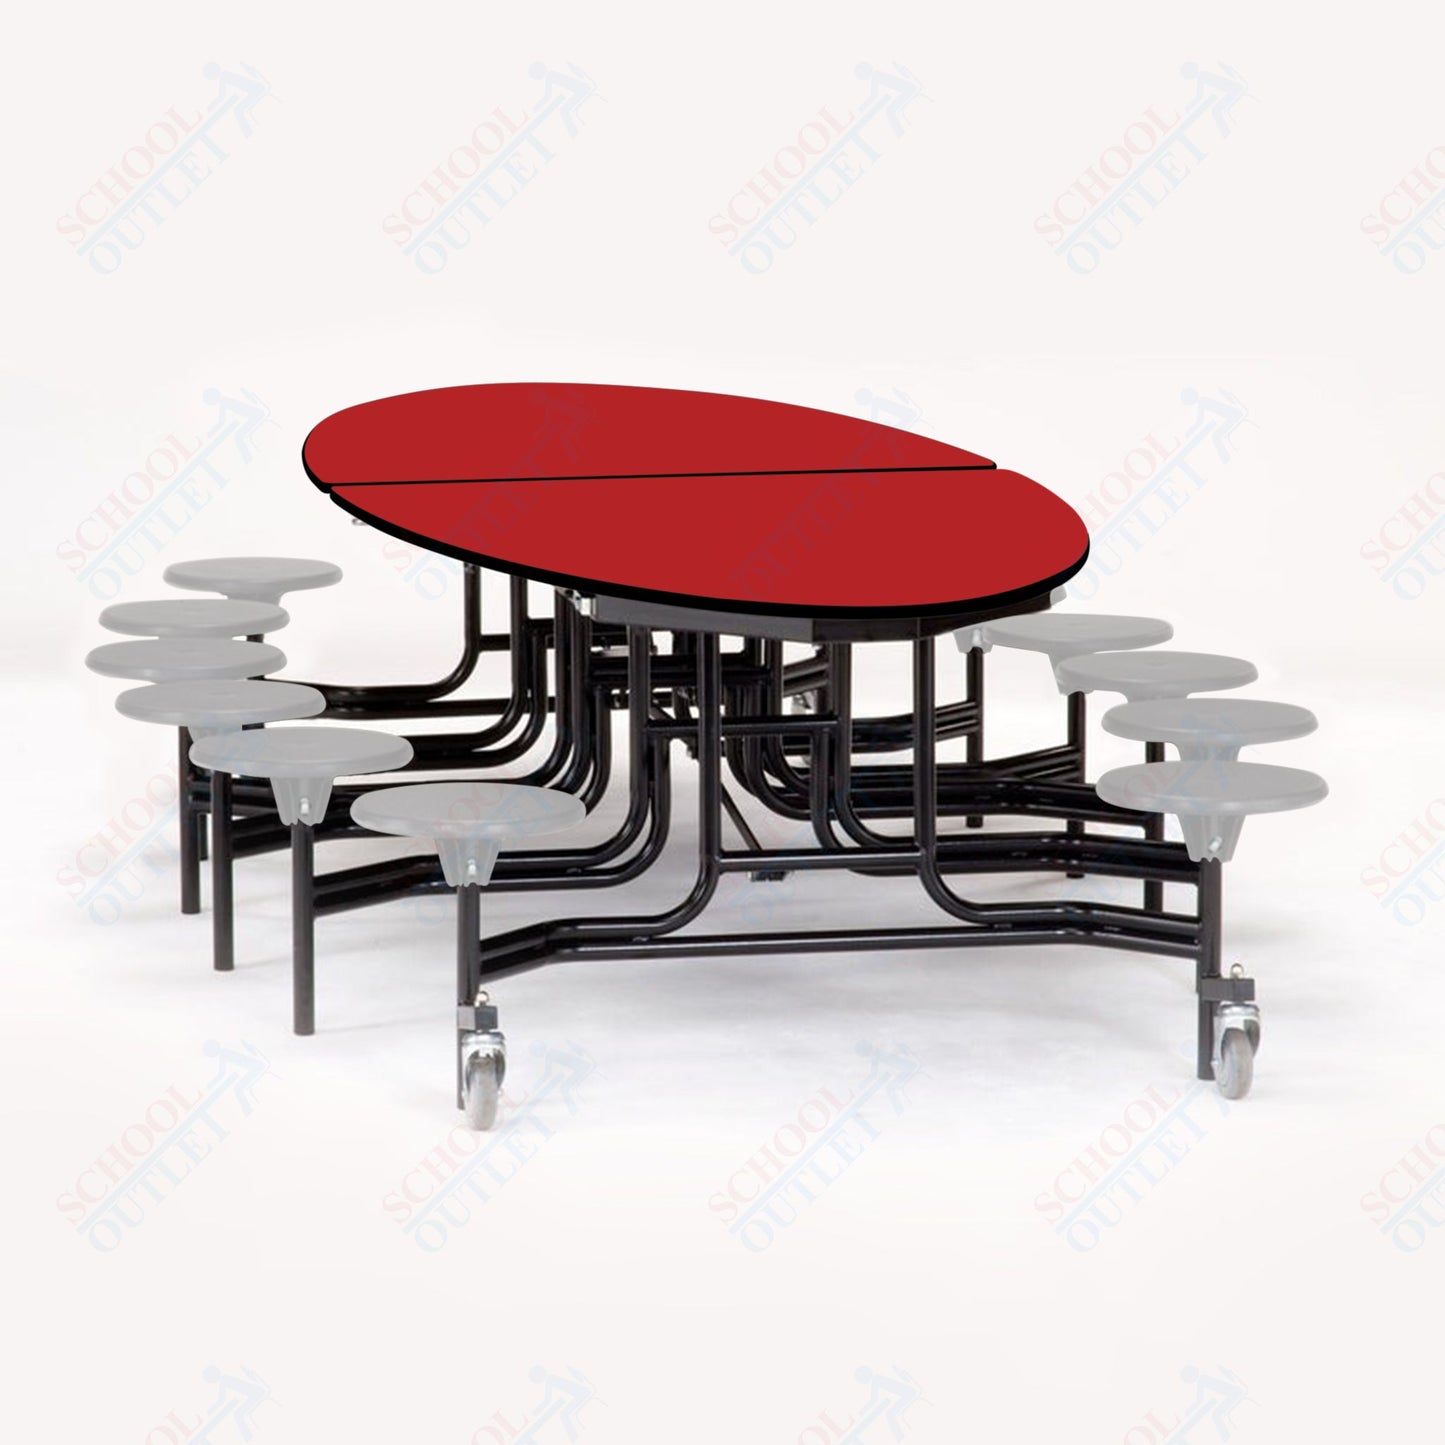 NPS 10' Elliptical Mobile Cafeteria Table - 12 Stools - Plywood Core - T-Molding Edge - Black Powdercoated Frame